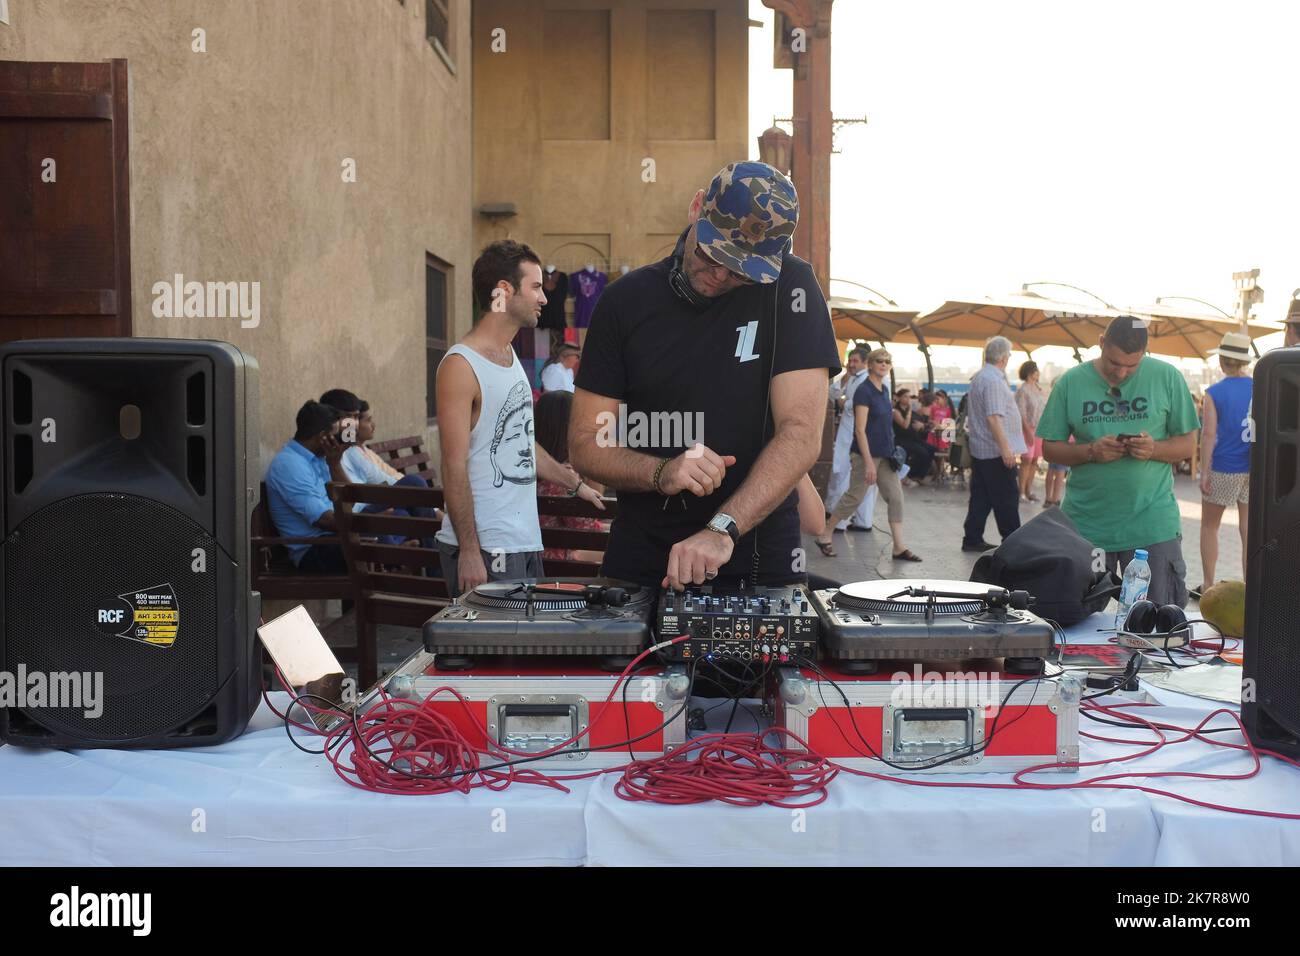 Male DJ with professional turntable, mixer, and speakers provide music and ambiance to a hip art fair in Dubai, UAE. Sunny weekend outdoor summer event. Stock Photo